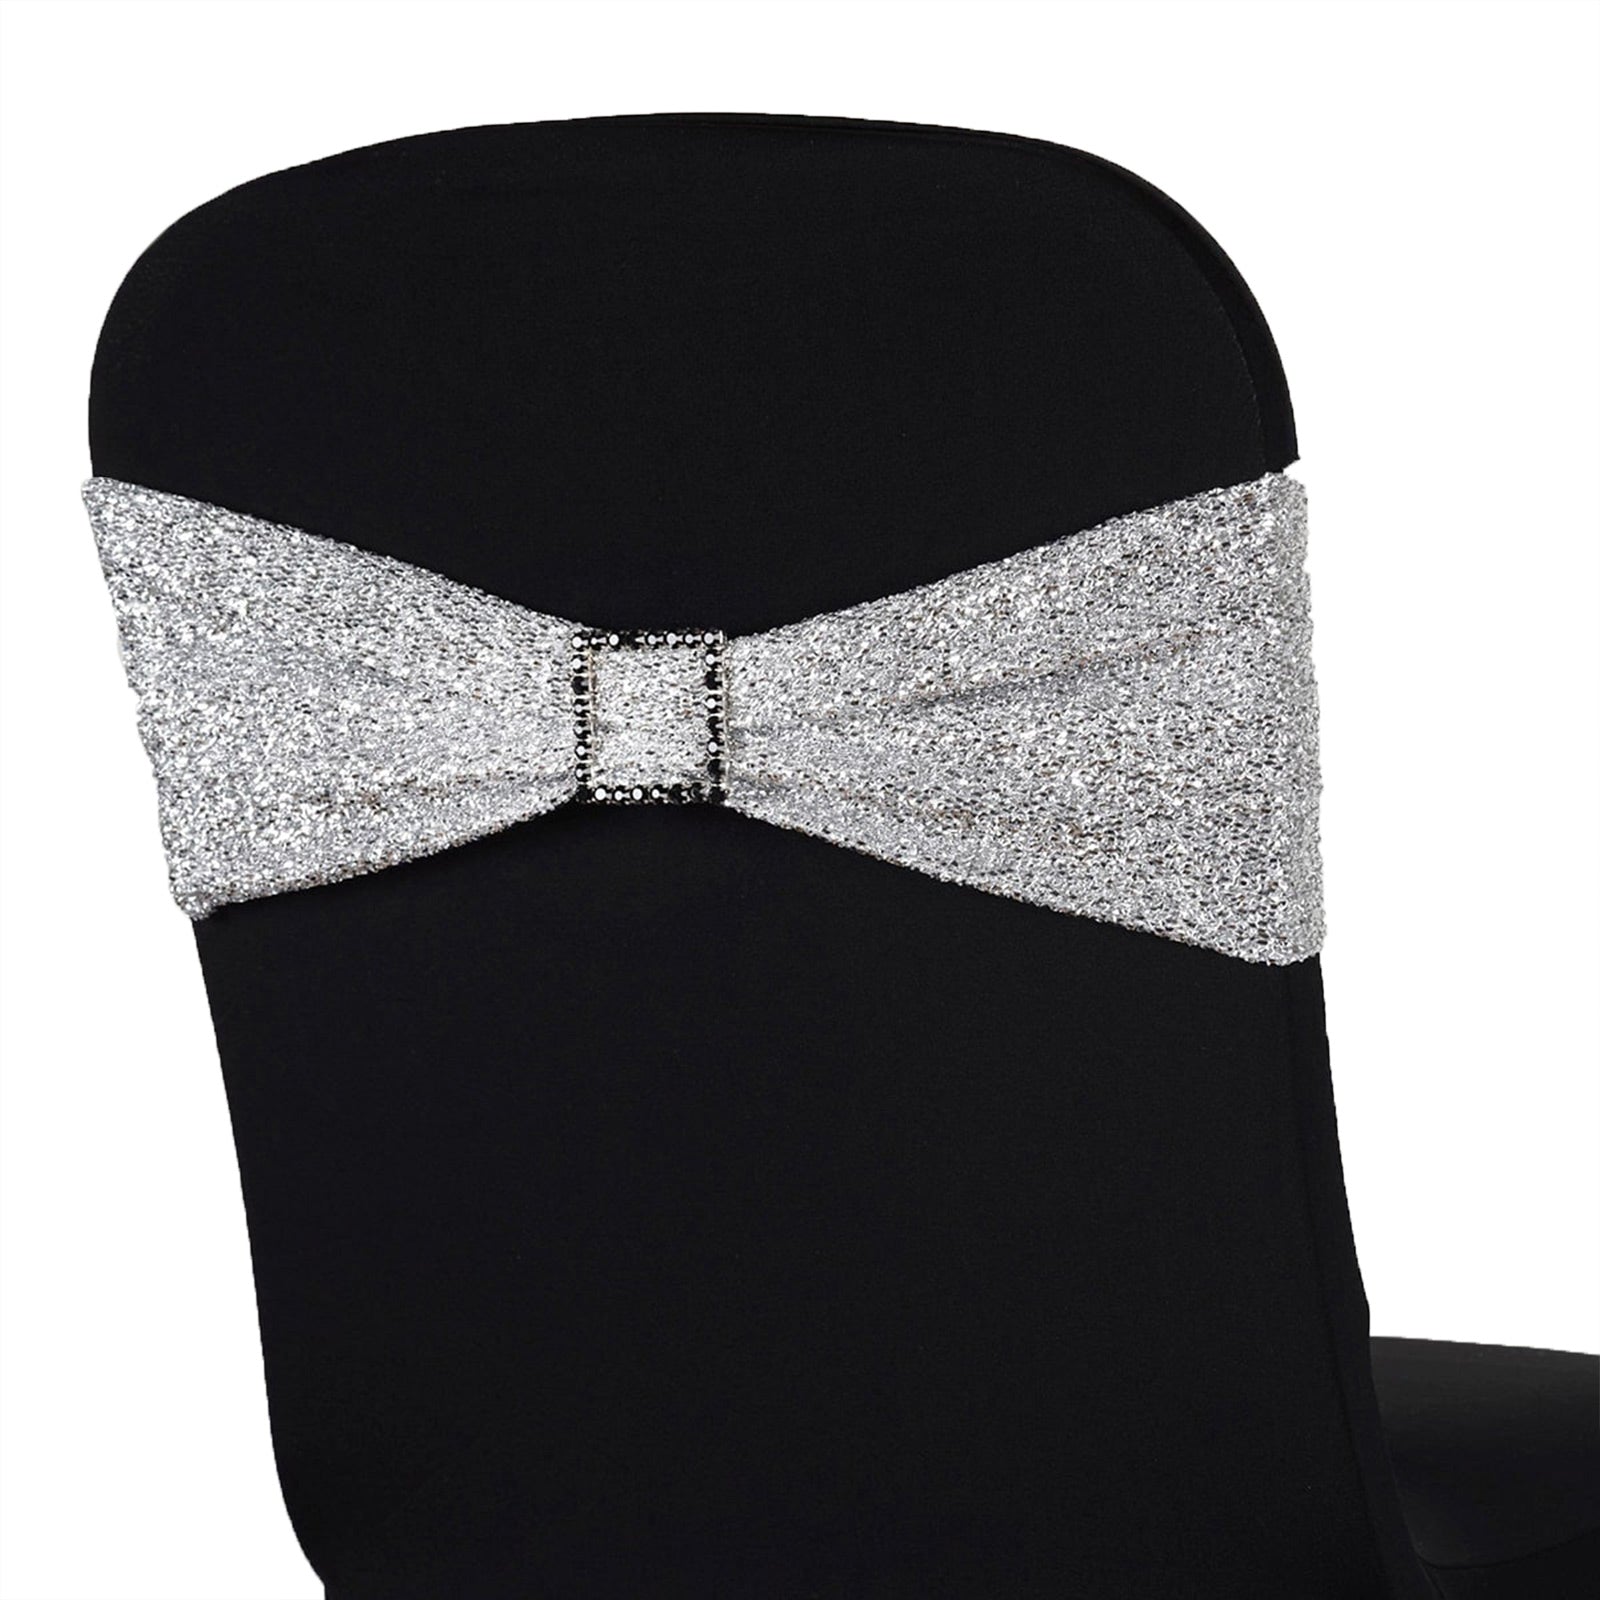 Metallic Tinsel Spandex Banquet Chair Cover with Sash Band and Buckle